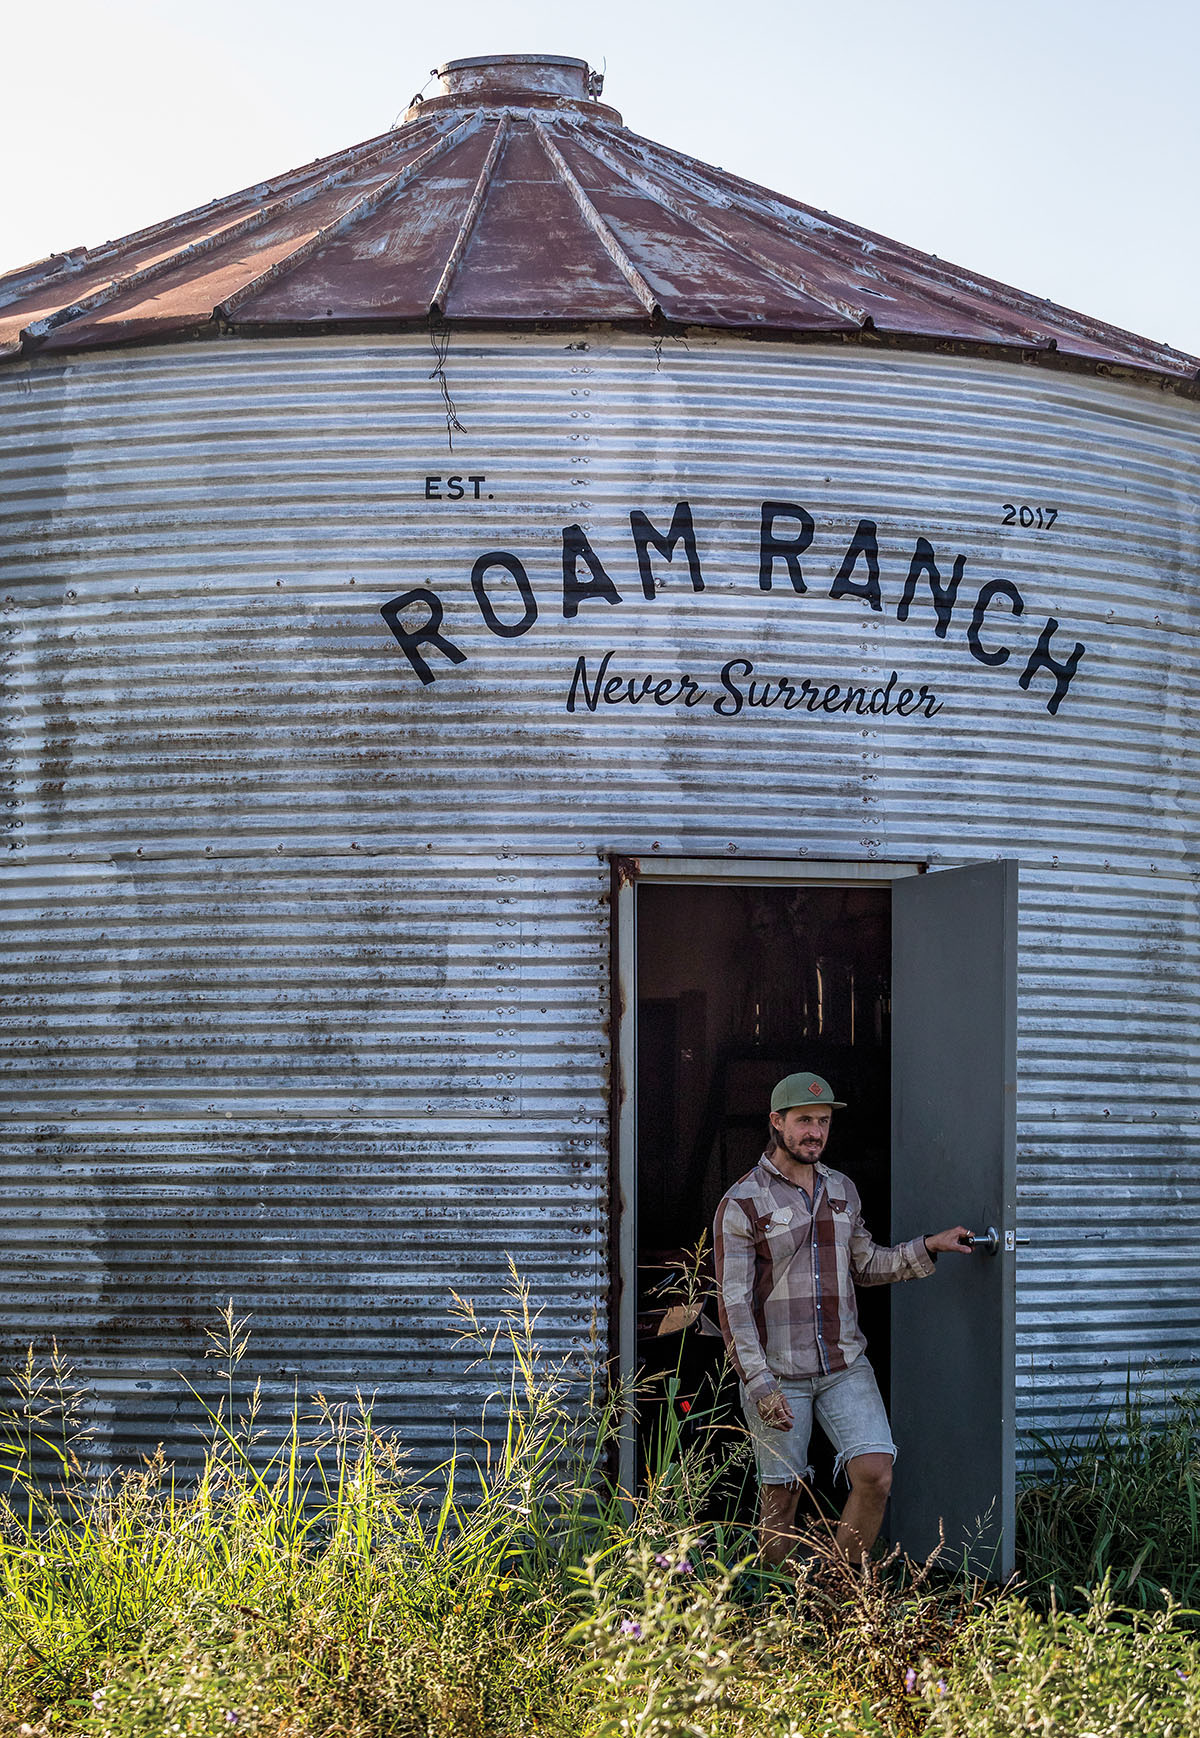 A man stands in the doorway of a rusted, silver silo reading "ROAM Ranch"